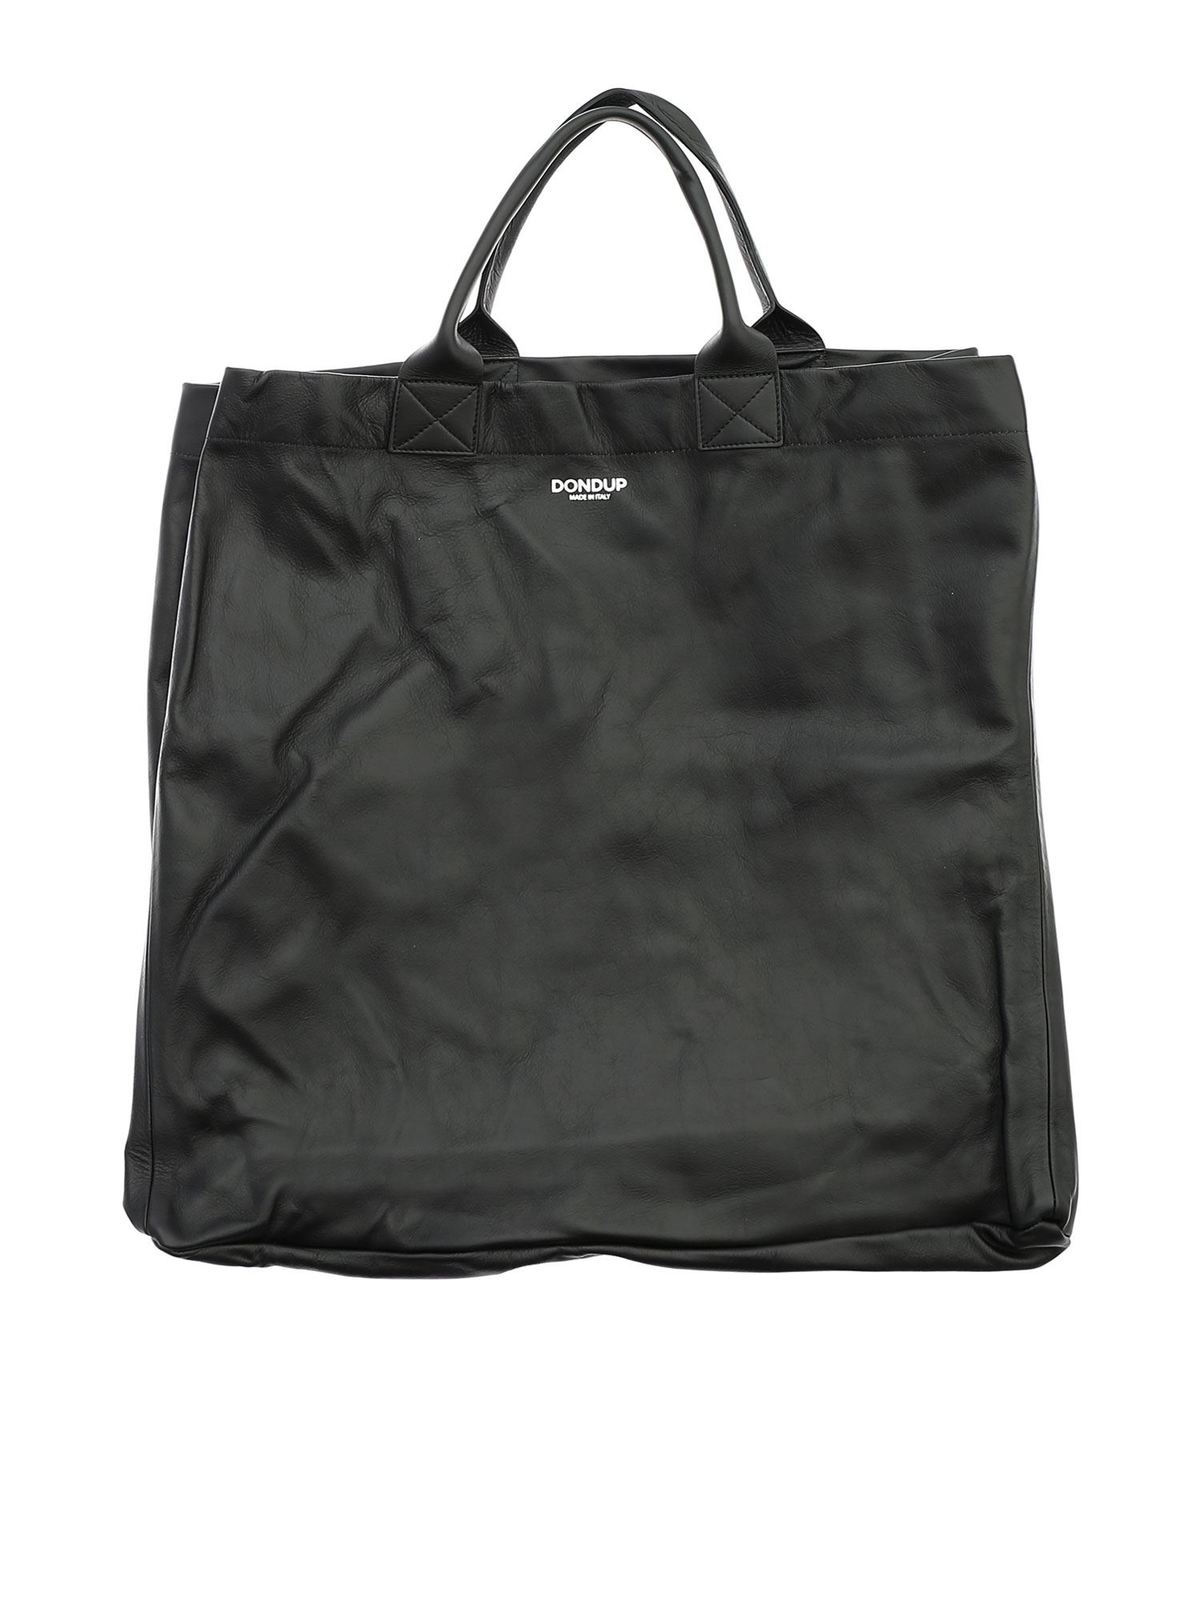 Totes bags maxi bag with silver logo - WB116Y00675DXXX999